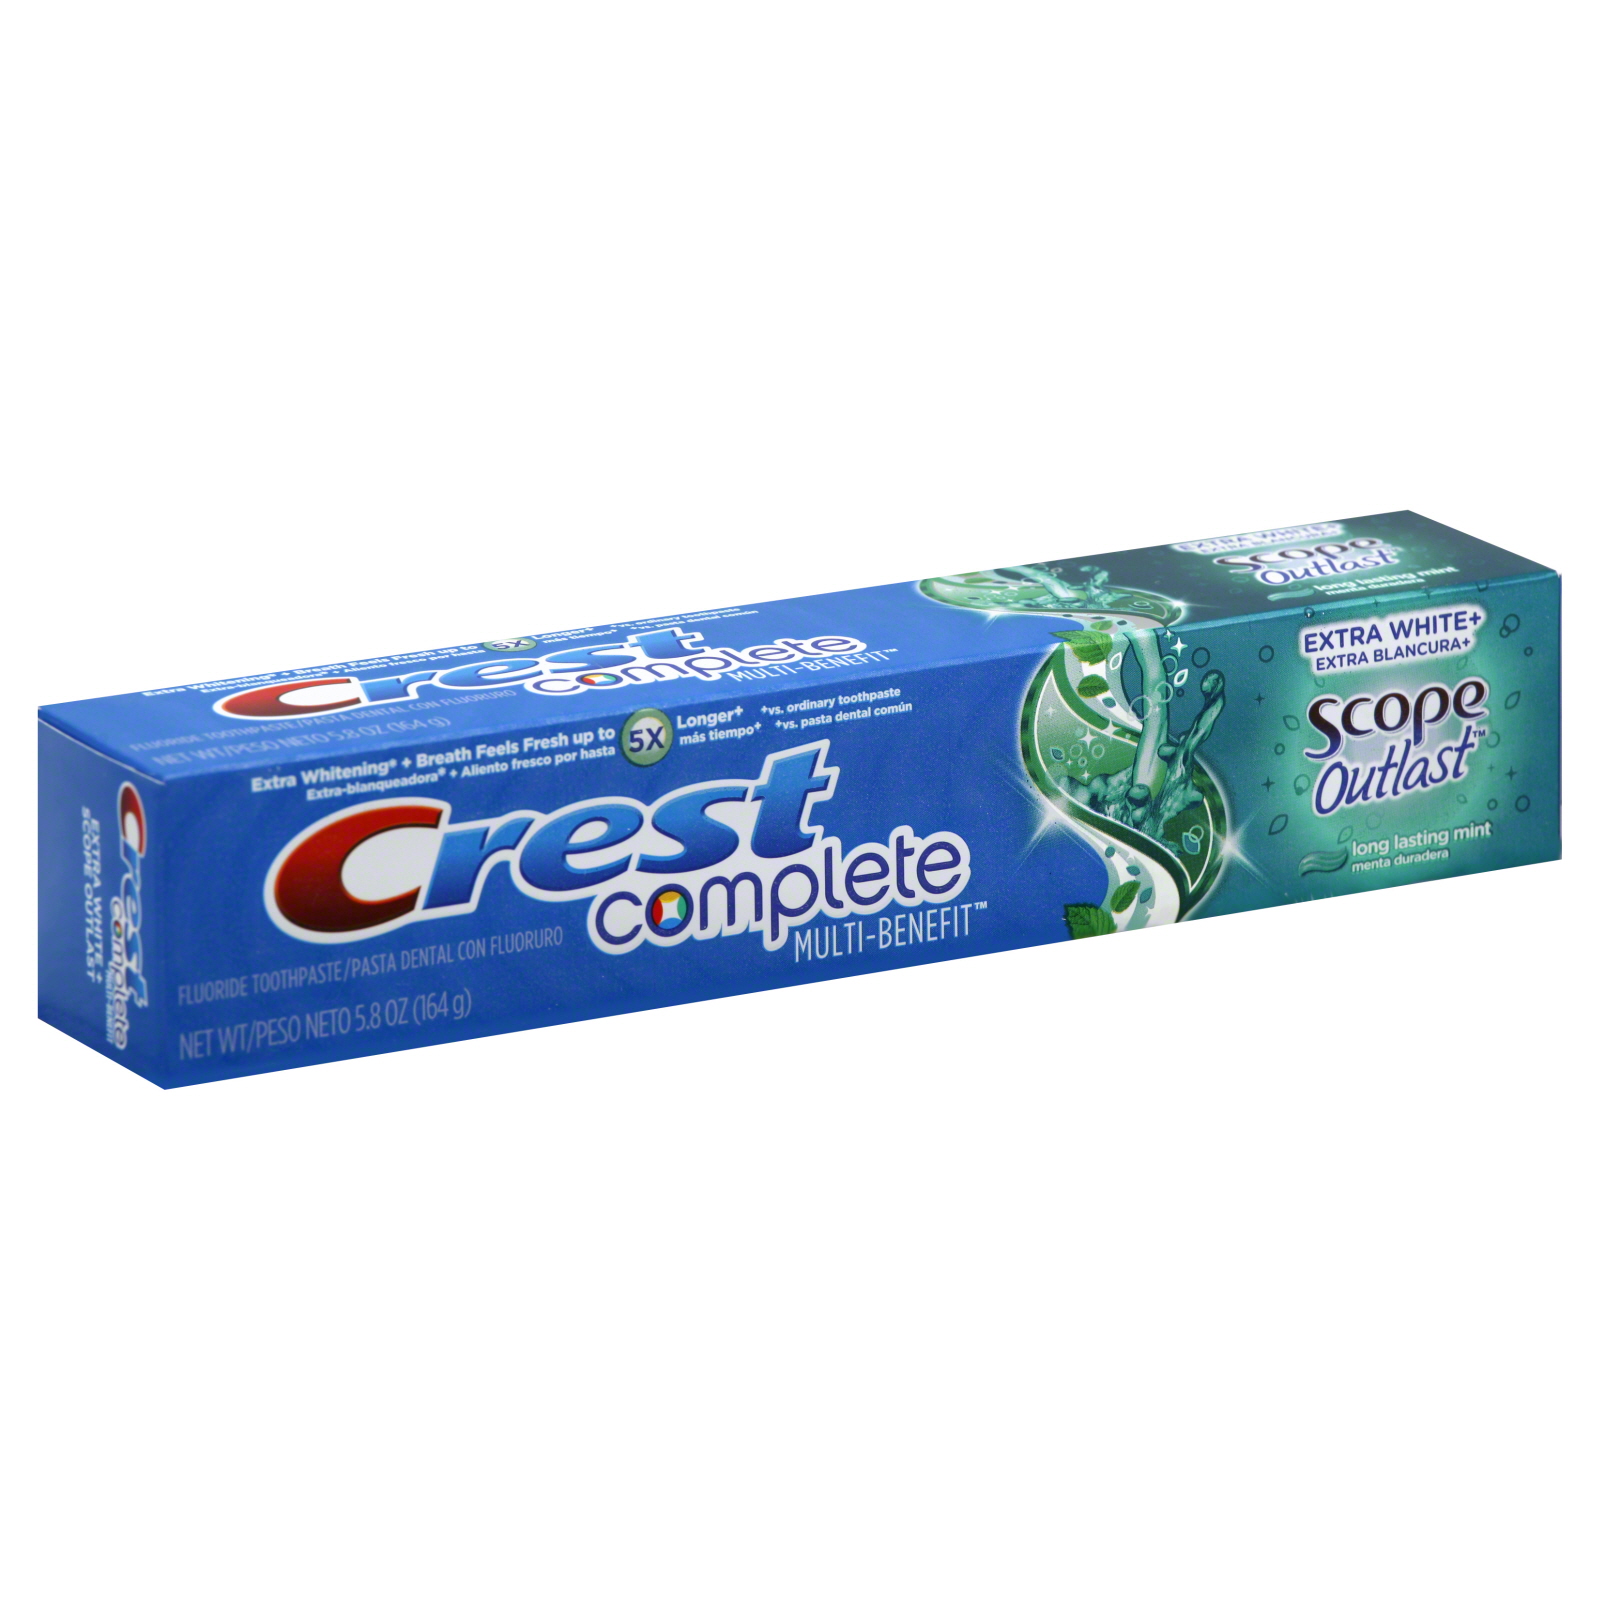 Crest Extra White Plus Scope Outlast Toothpaste, Fluoride, Long Lasting Mint, 5.8 oz (164 g)